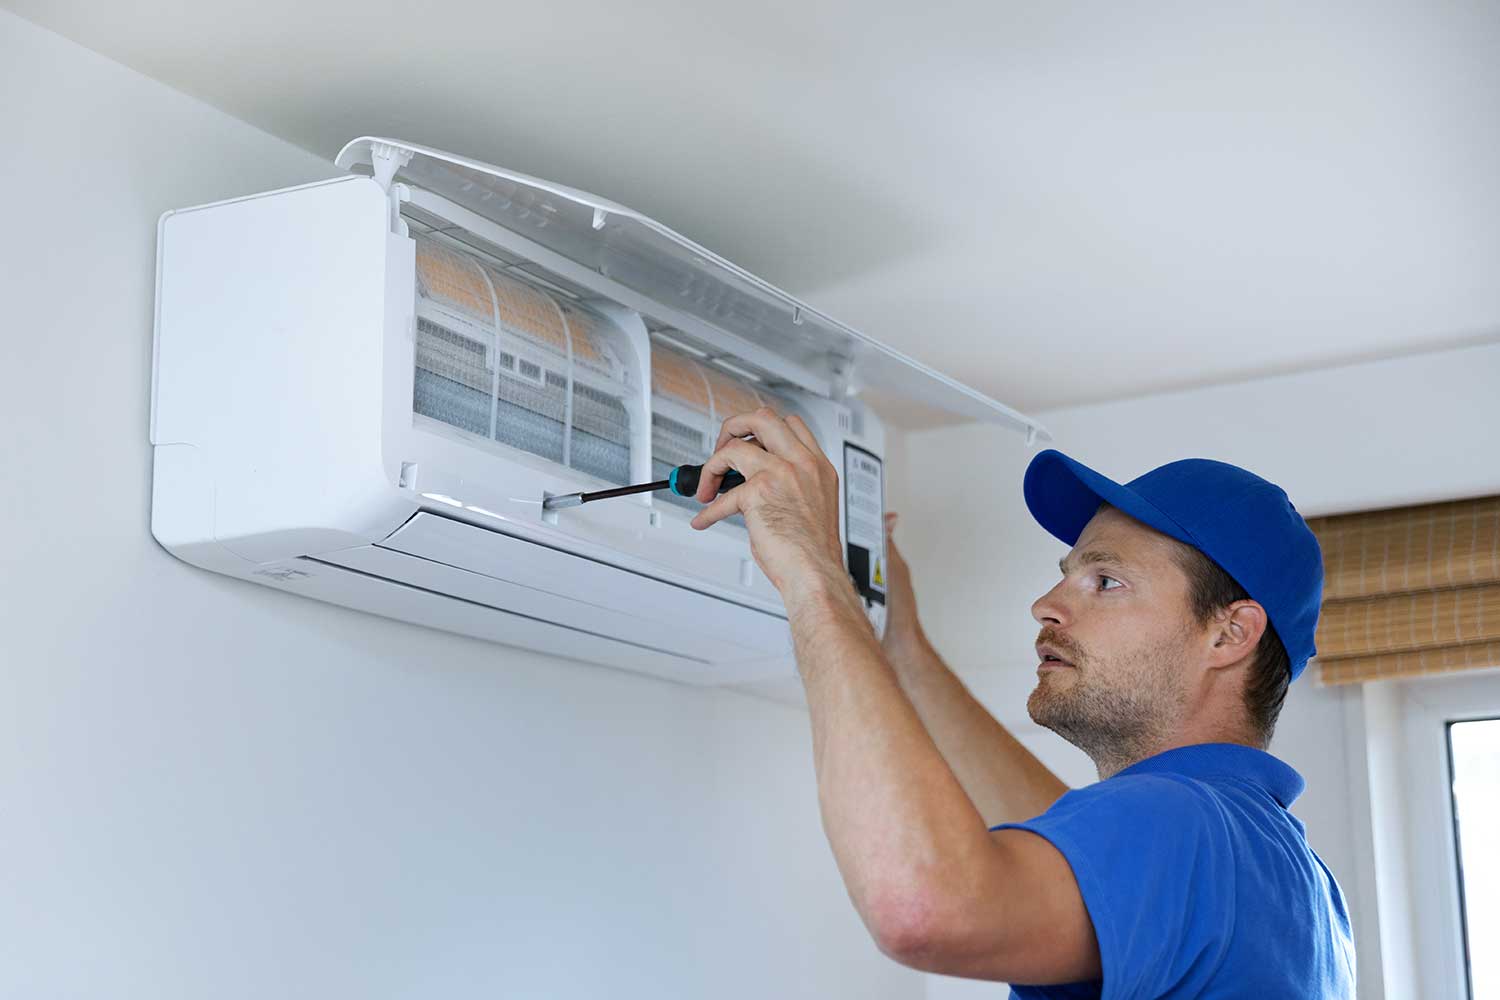 Emergency service line allows for a quicker Heating and A/C problem to be fixed